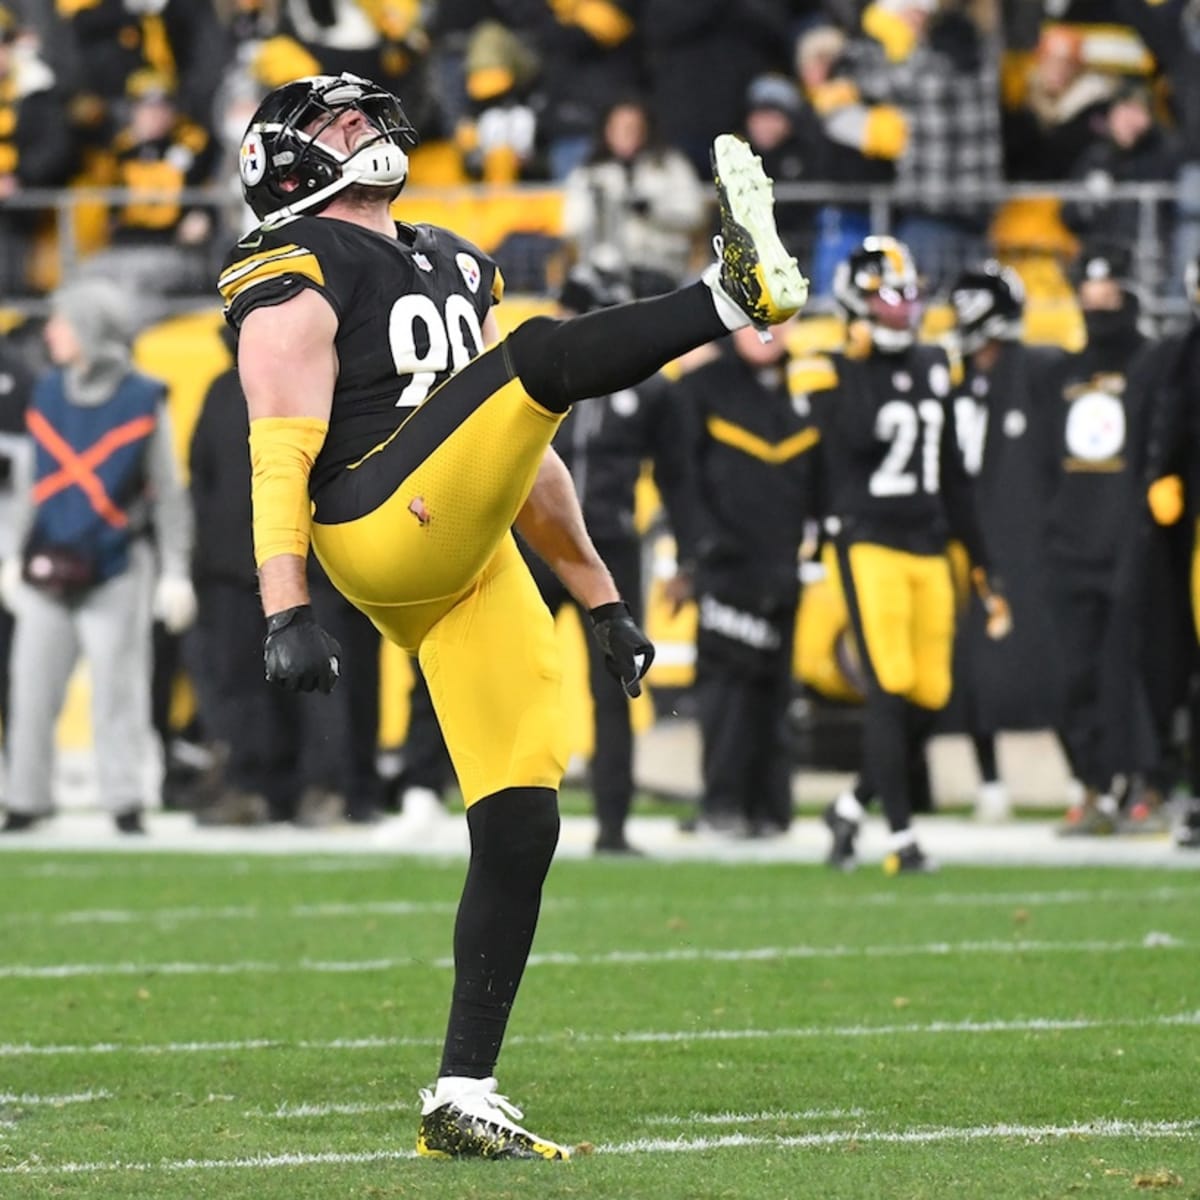 PFF] When TJ Watt played, Pittsburgh went 8-2 with a 79.0 team defense  grade. Without him, they went 1-6 with a 56.3 team defense grade — the  fourth-worst mark in the NFL